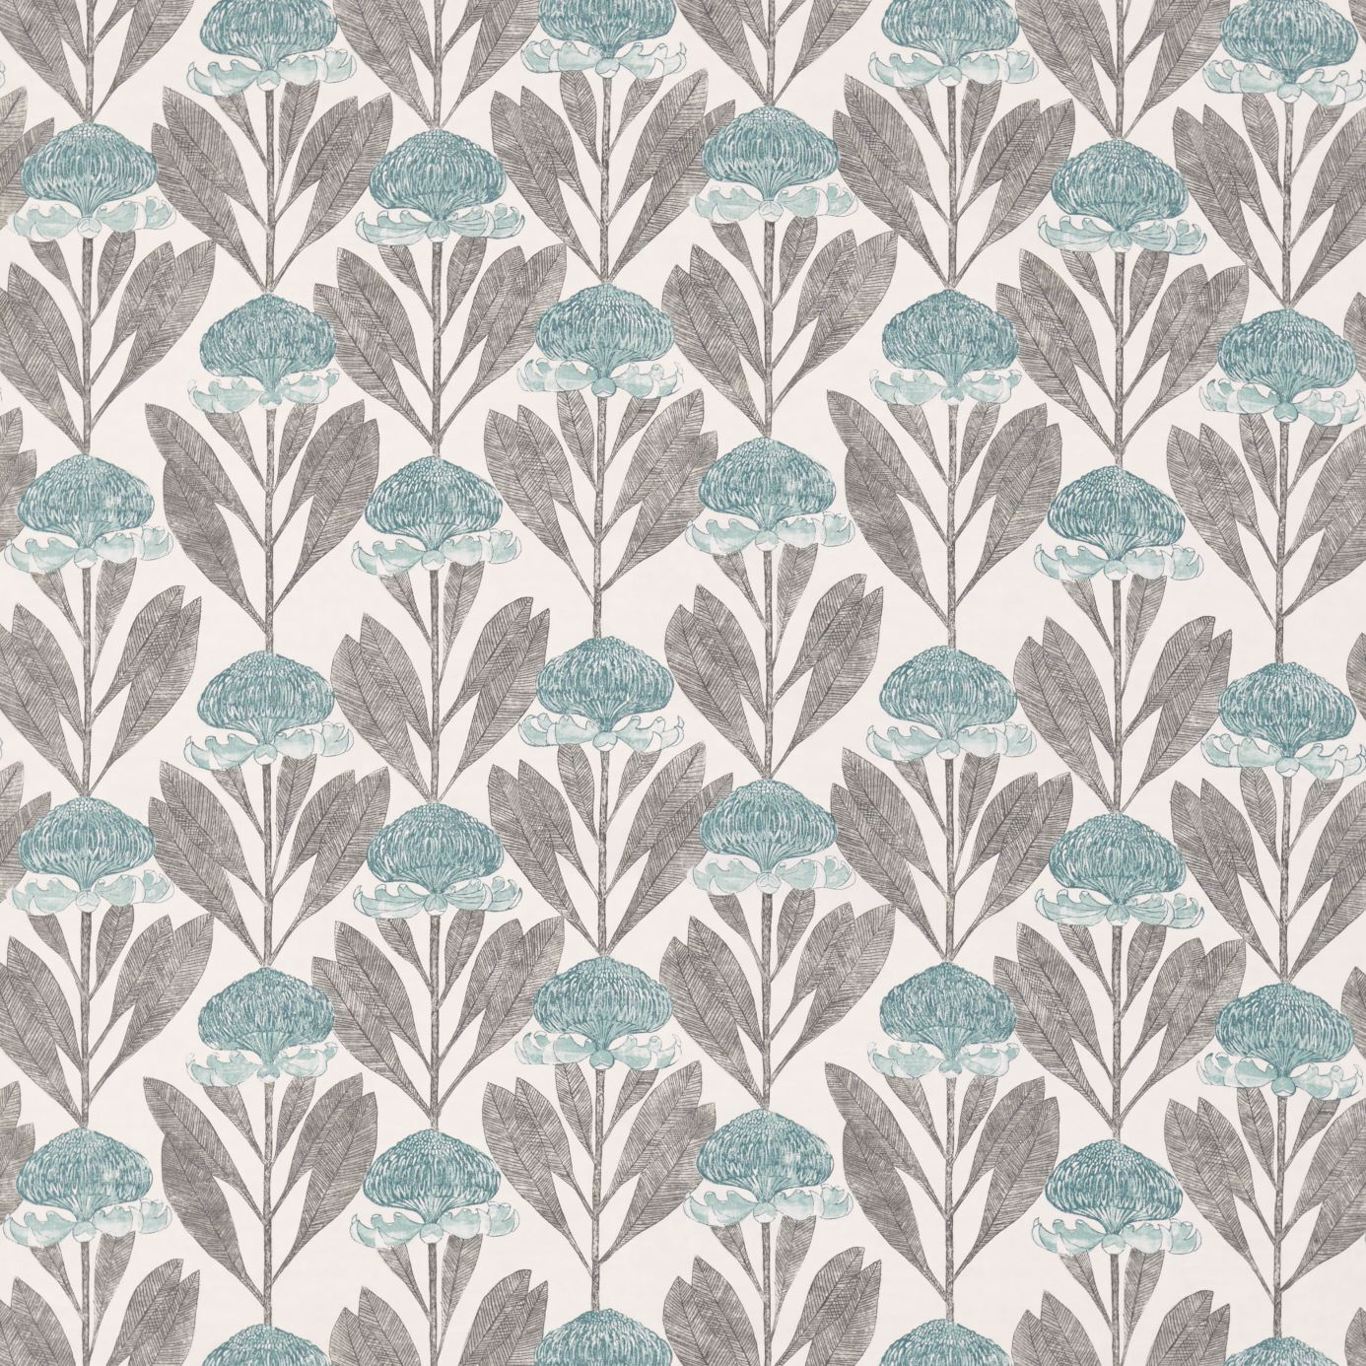 Protea Seaglass/Willow Fabric by HAR